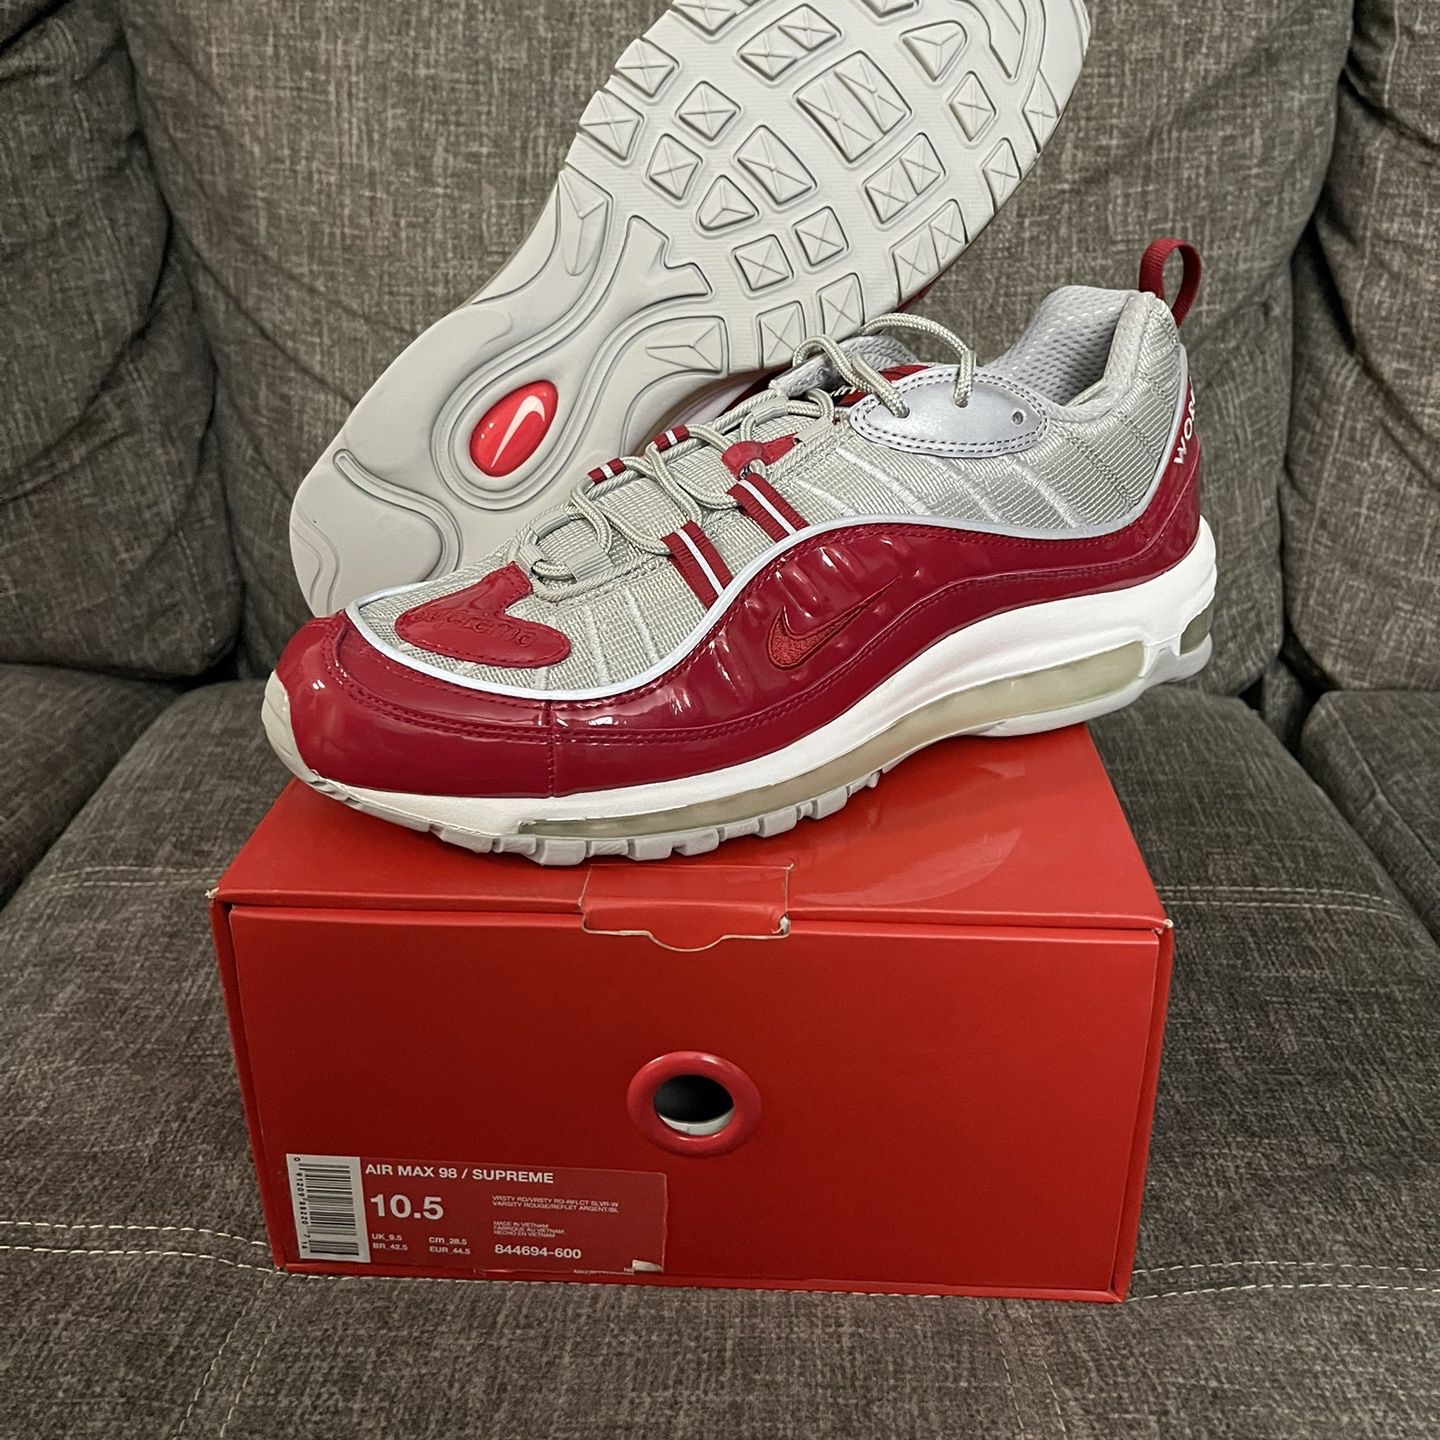 Nike Airmax 98 Red Size Brand New Unworn for Sale in New York, - OfferUp